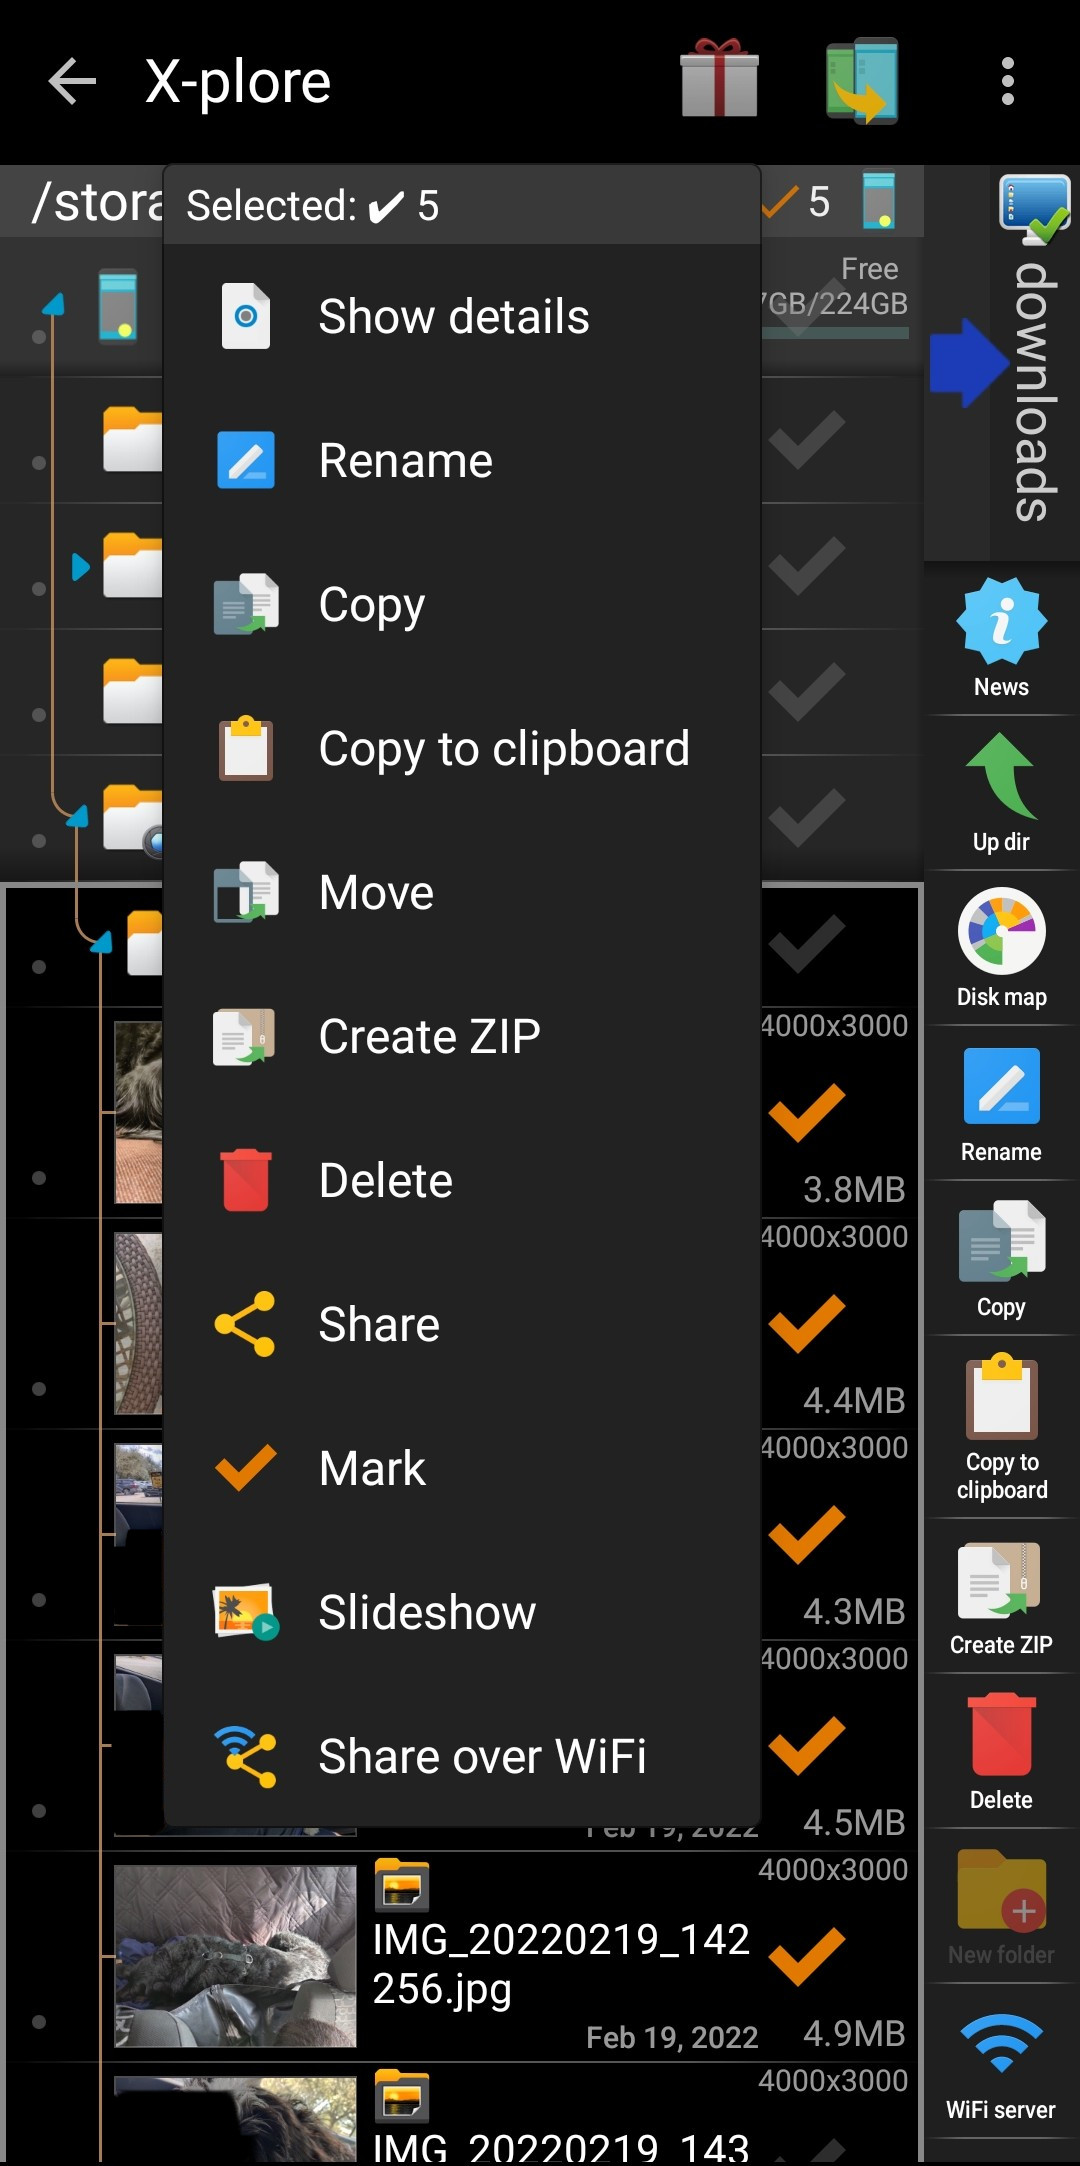 File copy confirmation in X-plore File Manager.